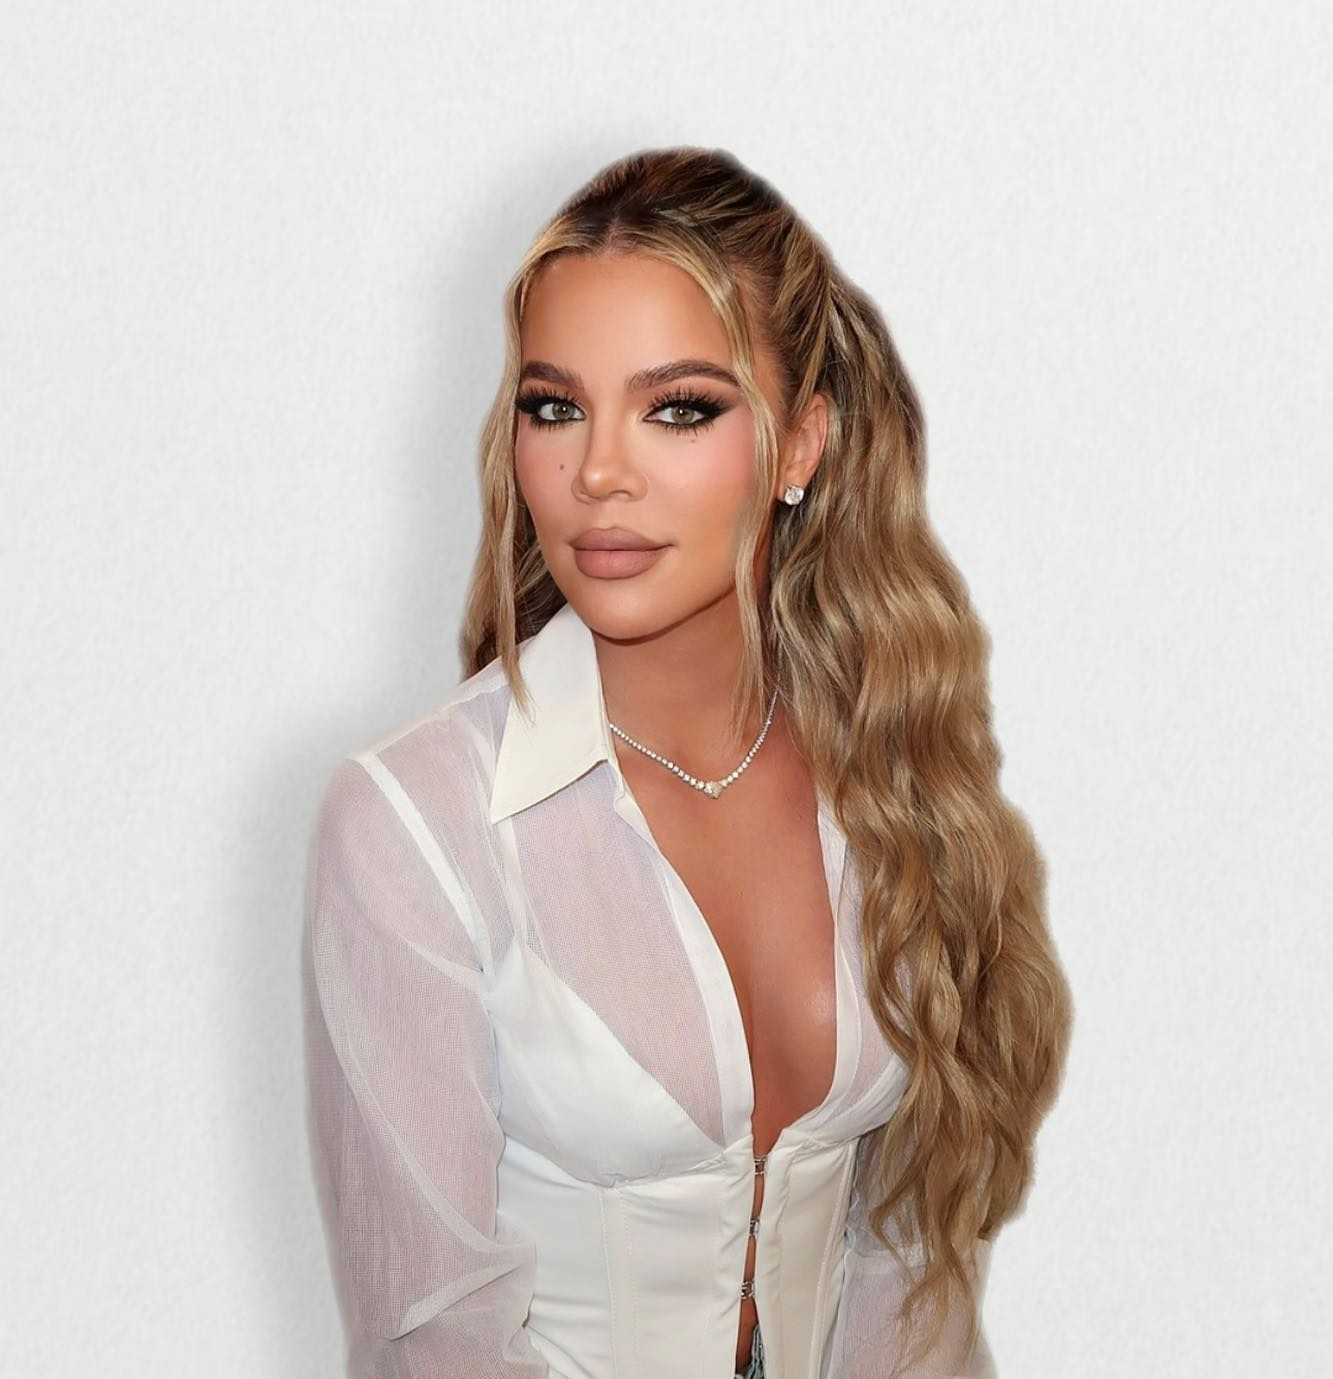 Khloe is known for using airbrushing and other Photoshop techniques